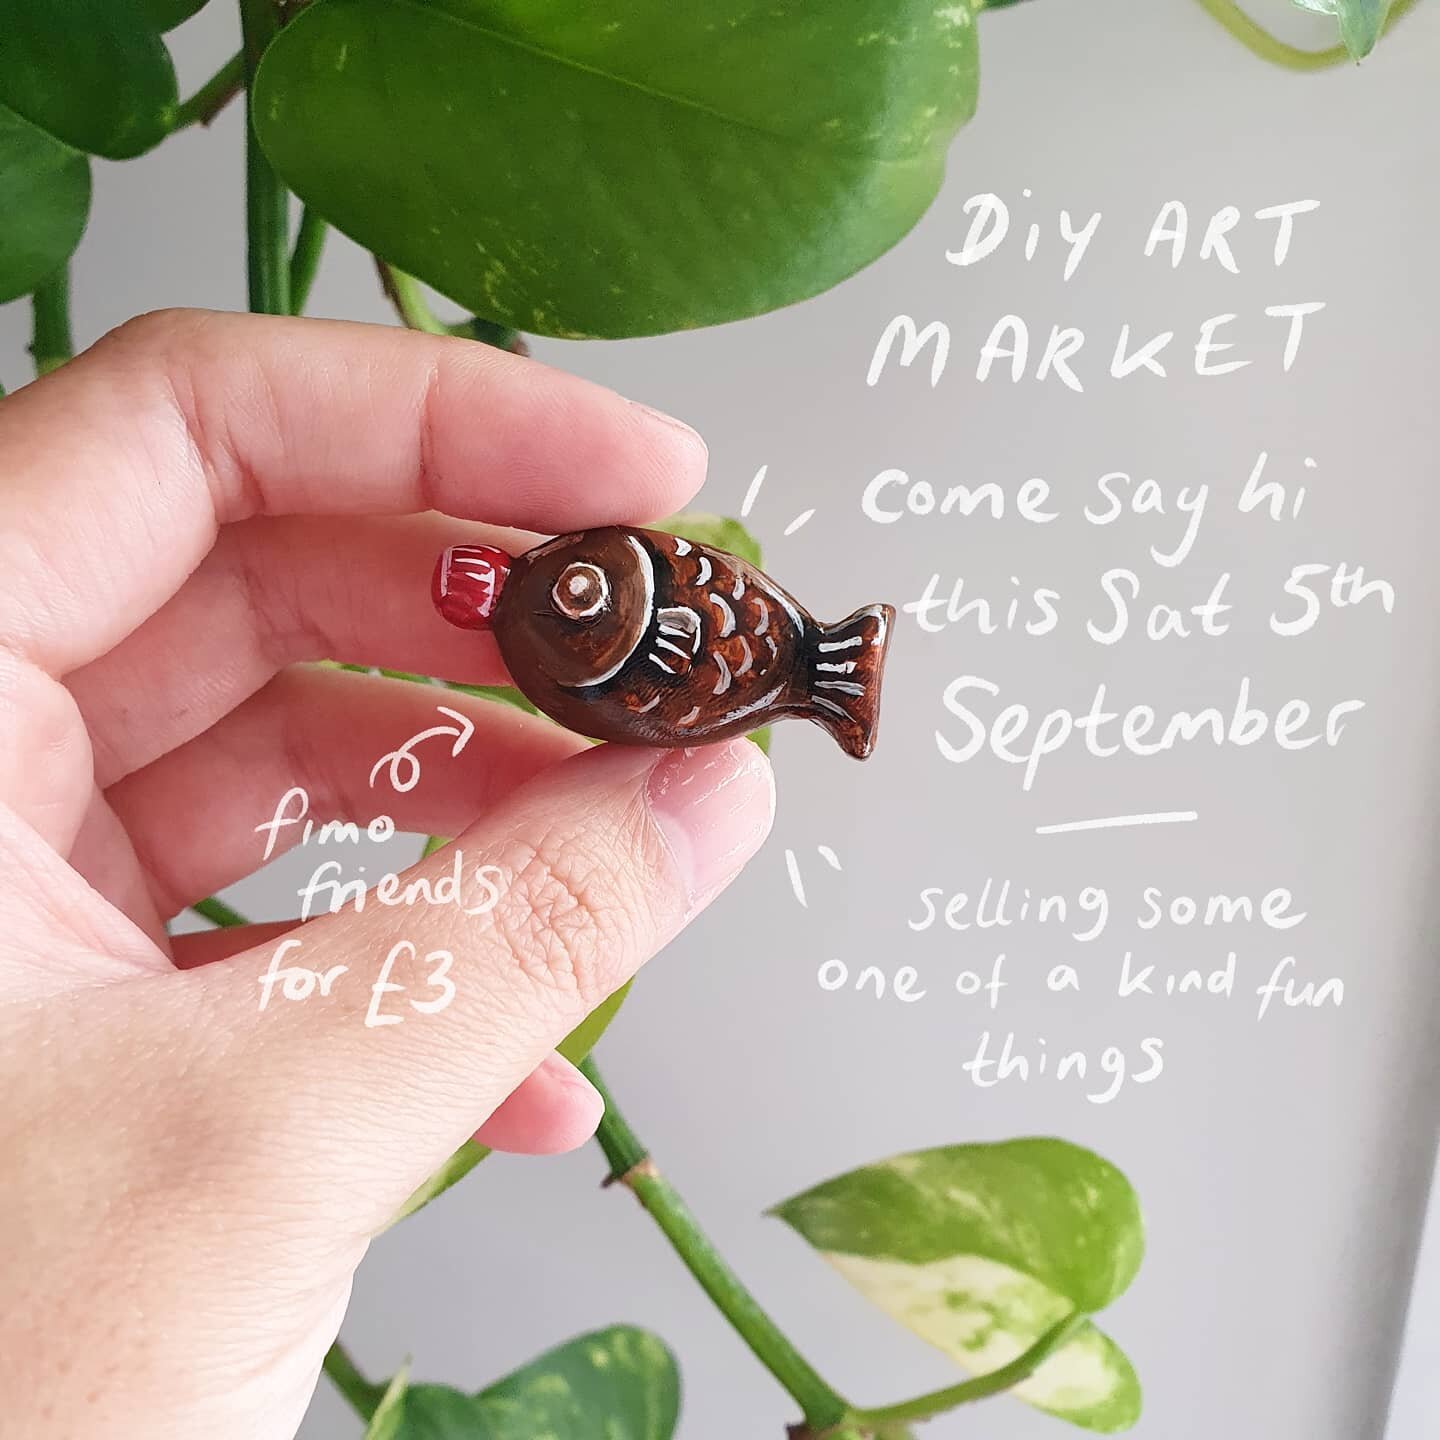 Fimo friends reminder ✌
DiY Art Market this Saturday 5th Sept @ Copeland Park, Unit 8! Come say hey. I will be selling some nonsense alongside some wonderfully talented pals
@please_bear_with @laugahey @limaakhtar @liisachisholm 
.
.
.
#copelandpark 